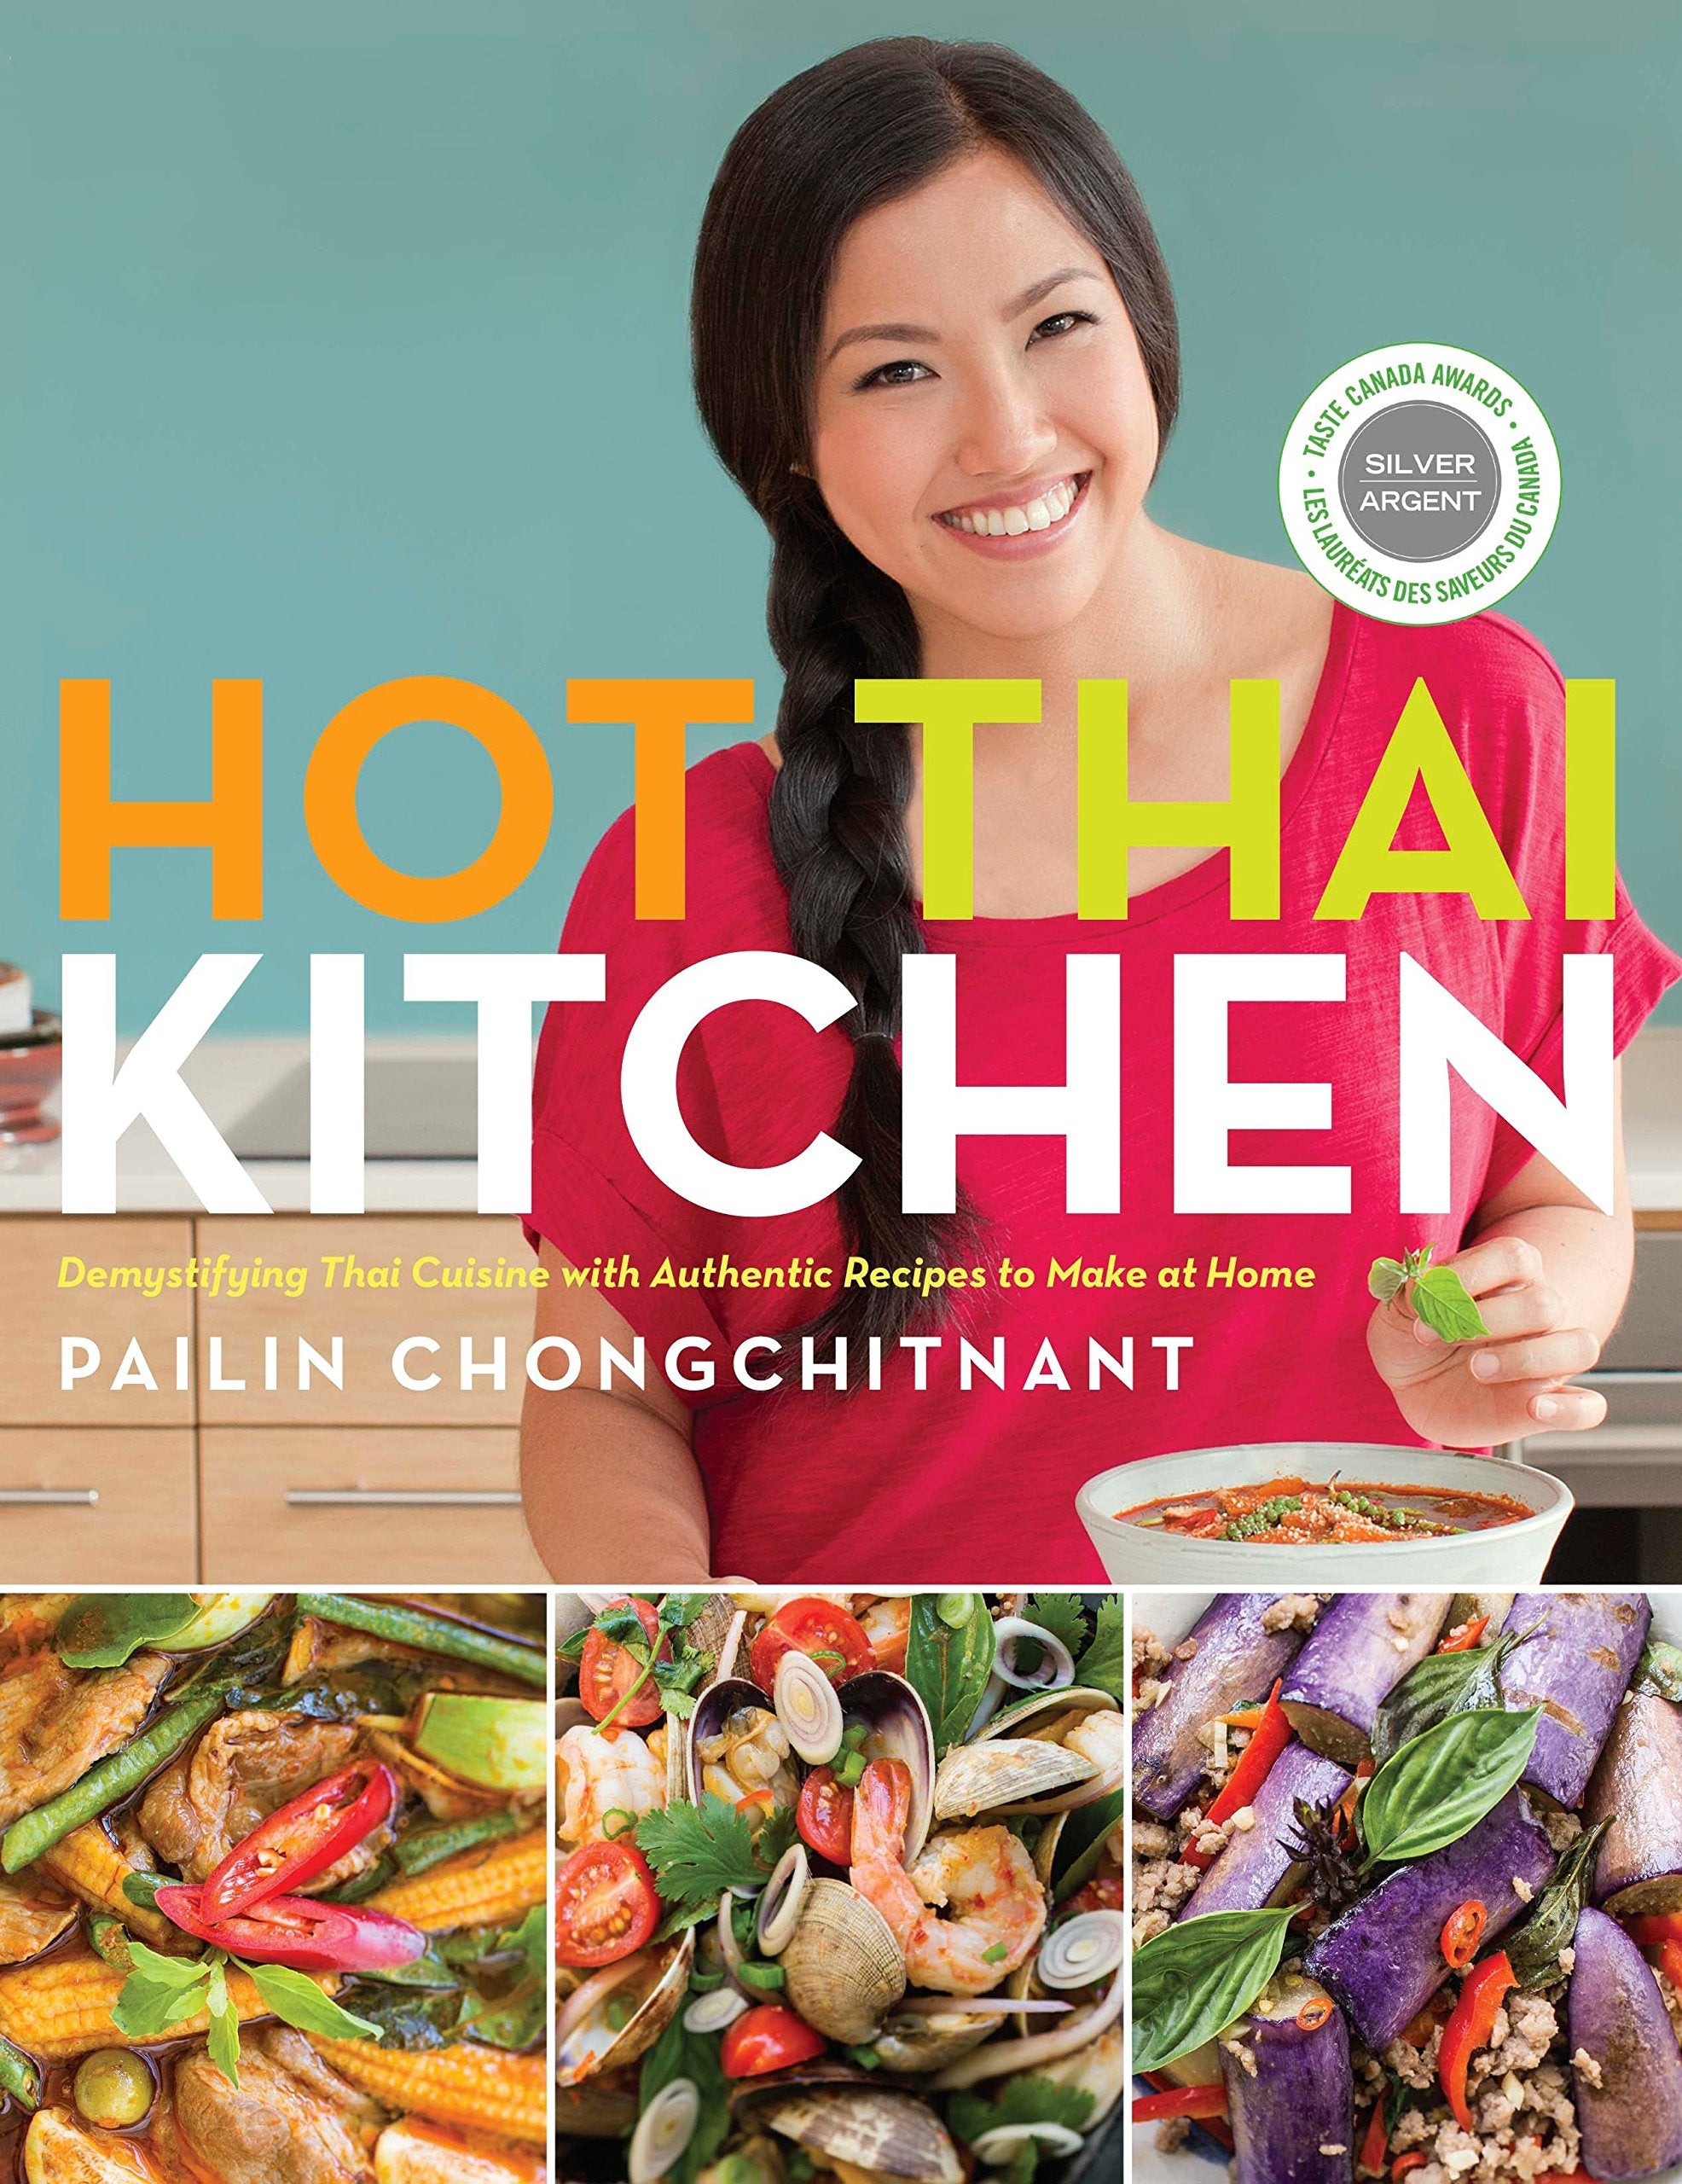 Hot Thai Kitchen: Demystifying Thai Cuisine with Authentic Recipes to Make at Home (Pailin Chongchitnan)